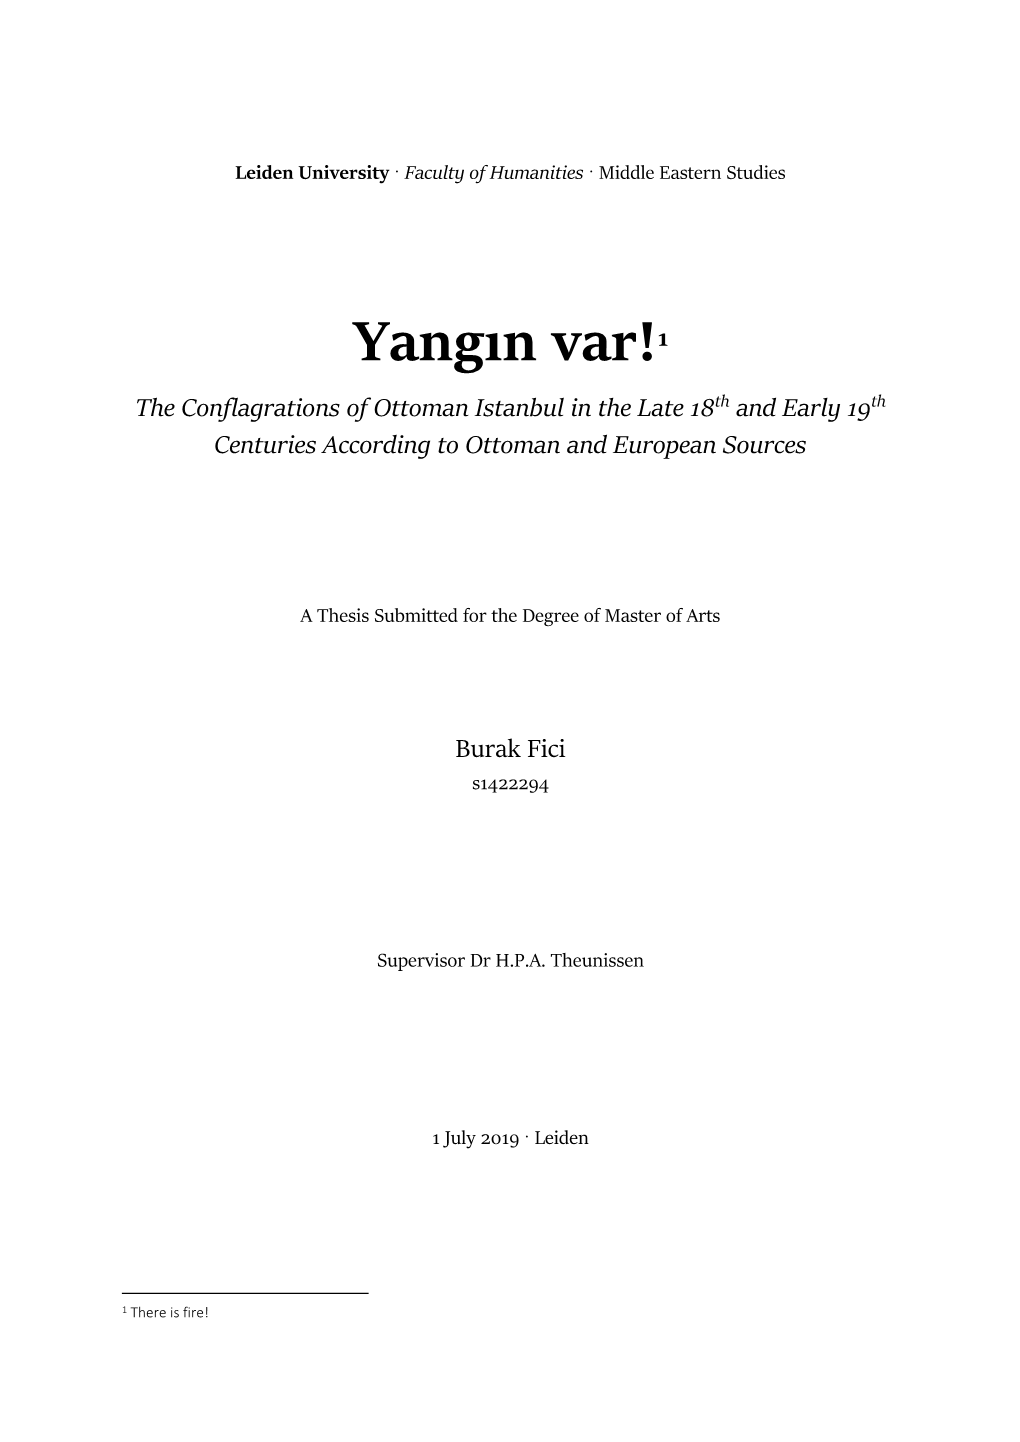 Yangın Var! the Conflagrations of Ottoman Istanbul in the Late 18Th and Early 19Th Centuries According to Ottoman and European Sources